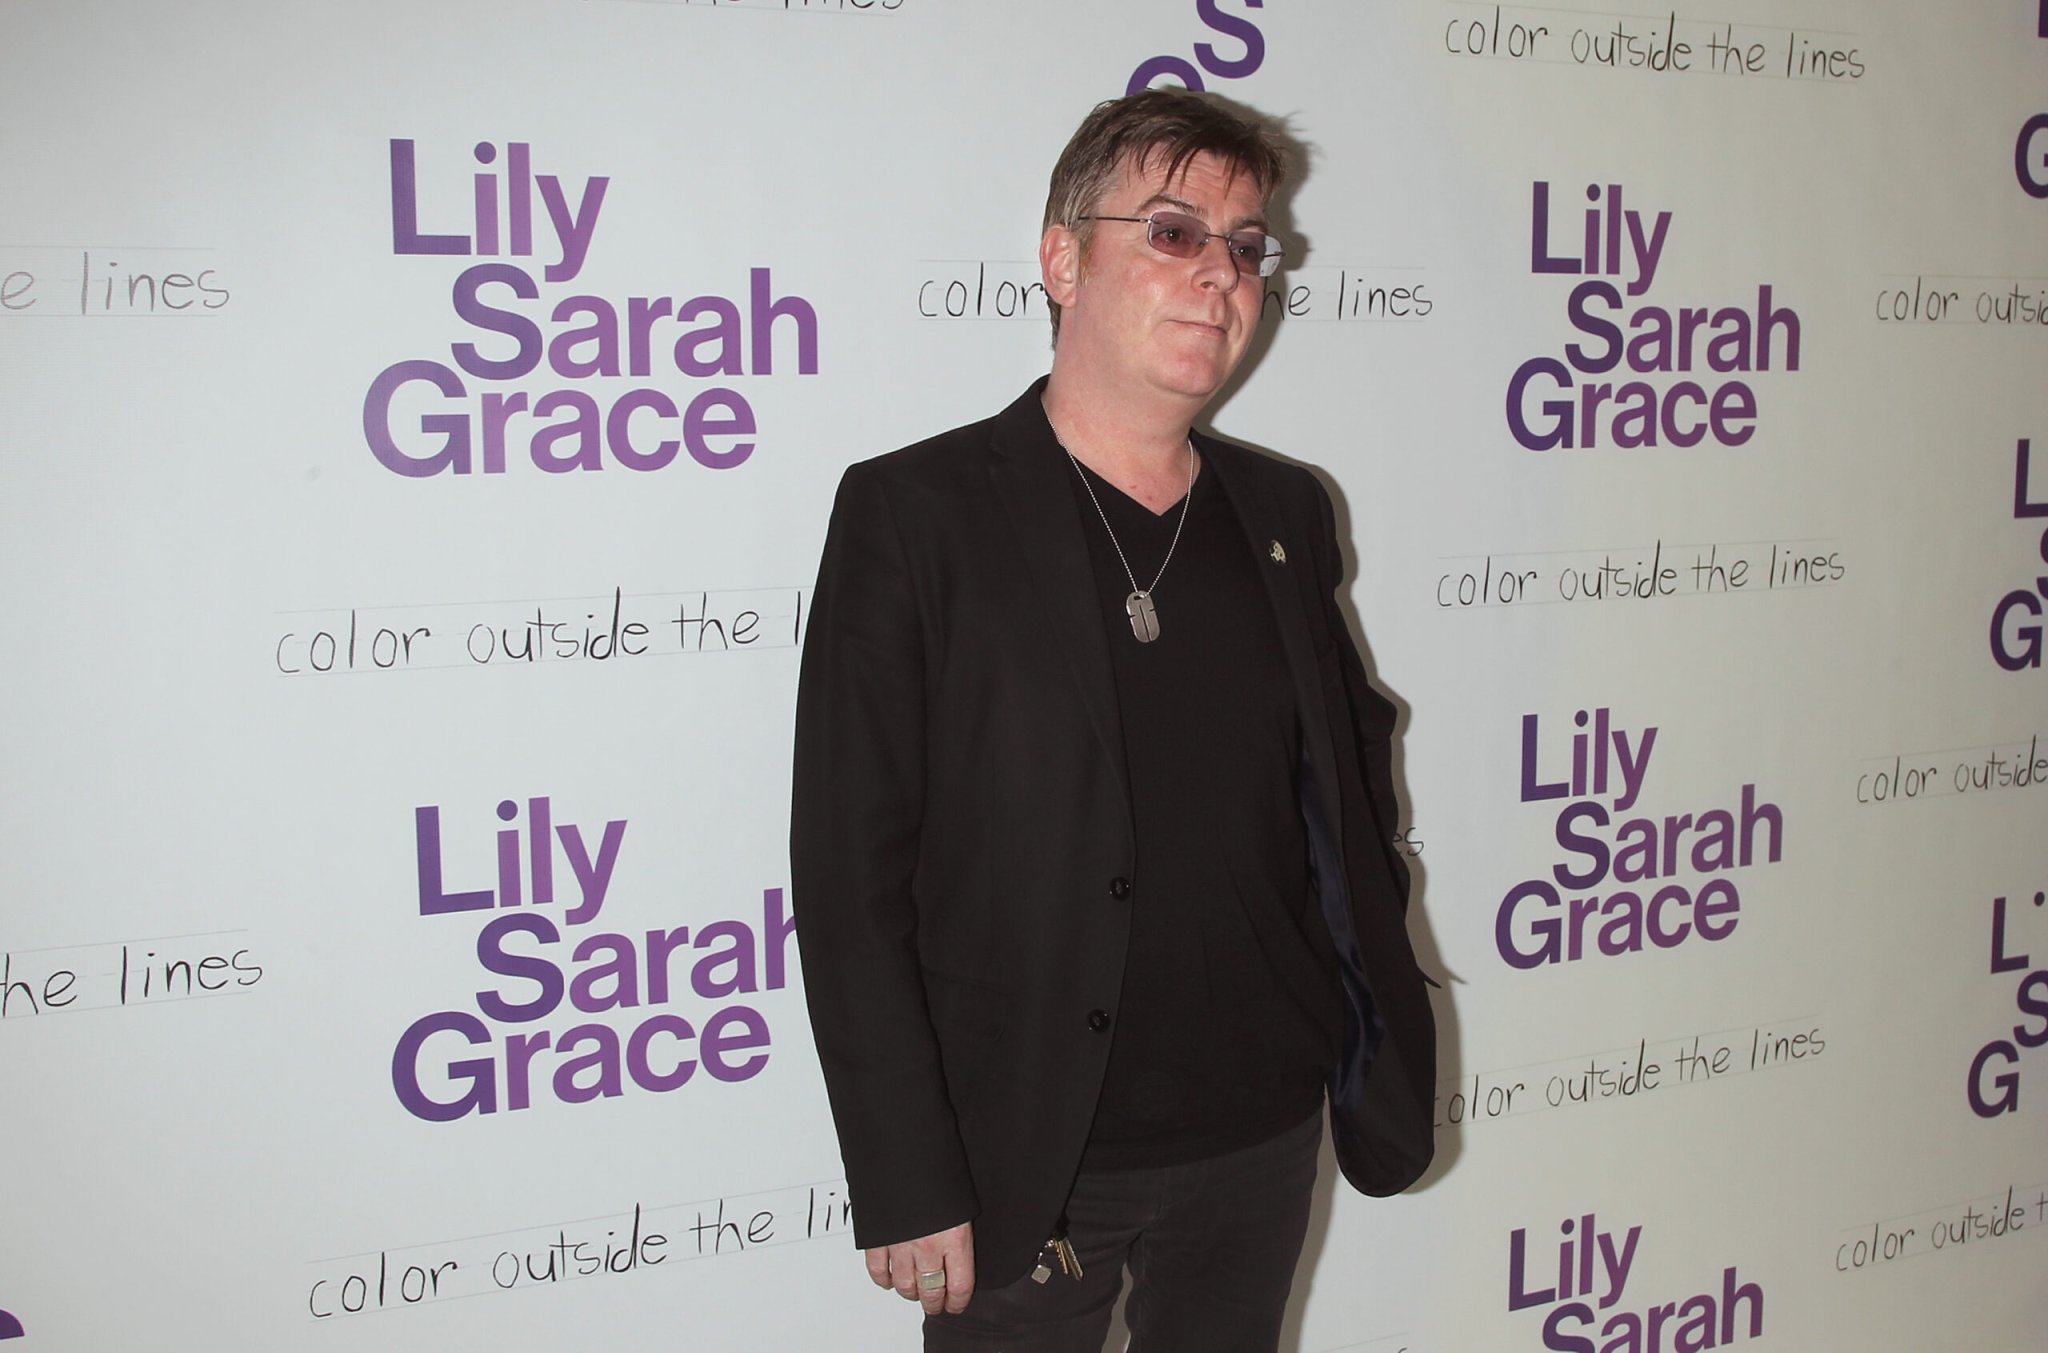 Andy Rourke, Bassist For The Smiths And Morrissey, Dies At 59 - SPIN